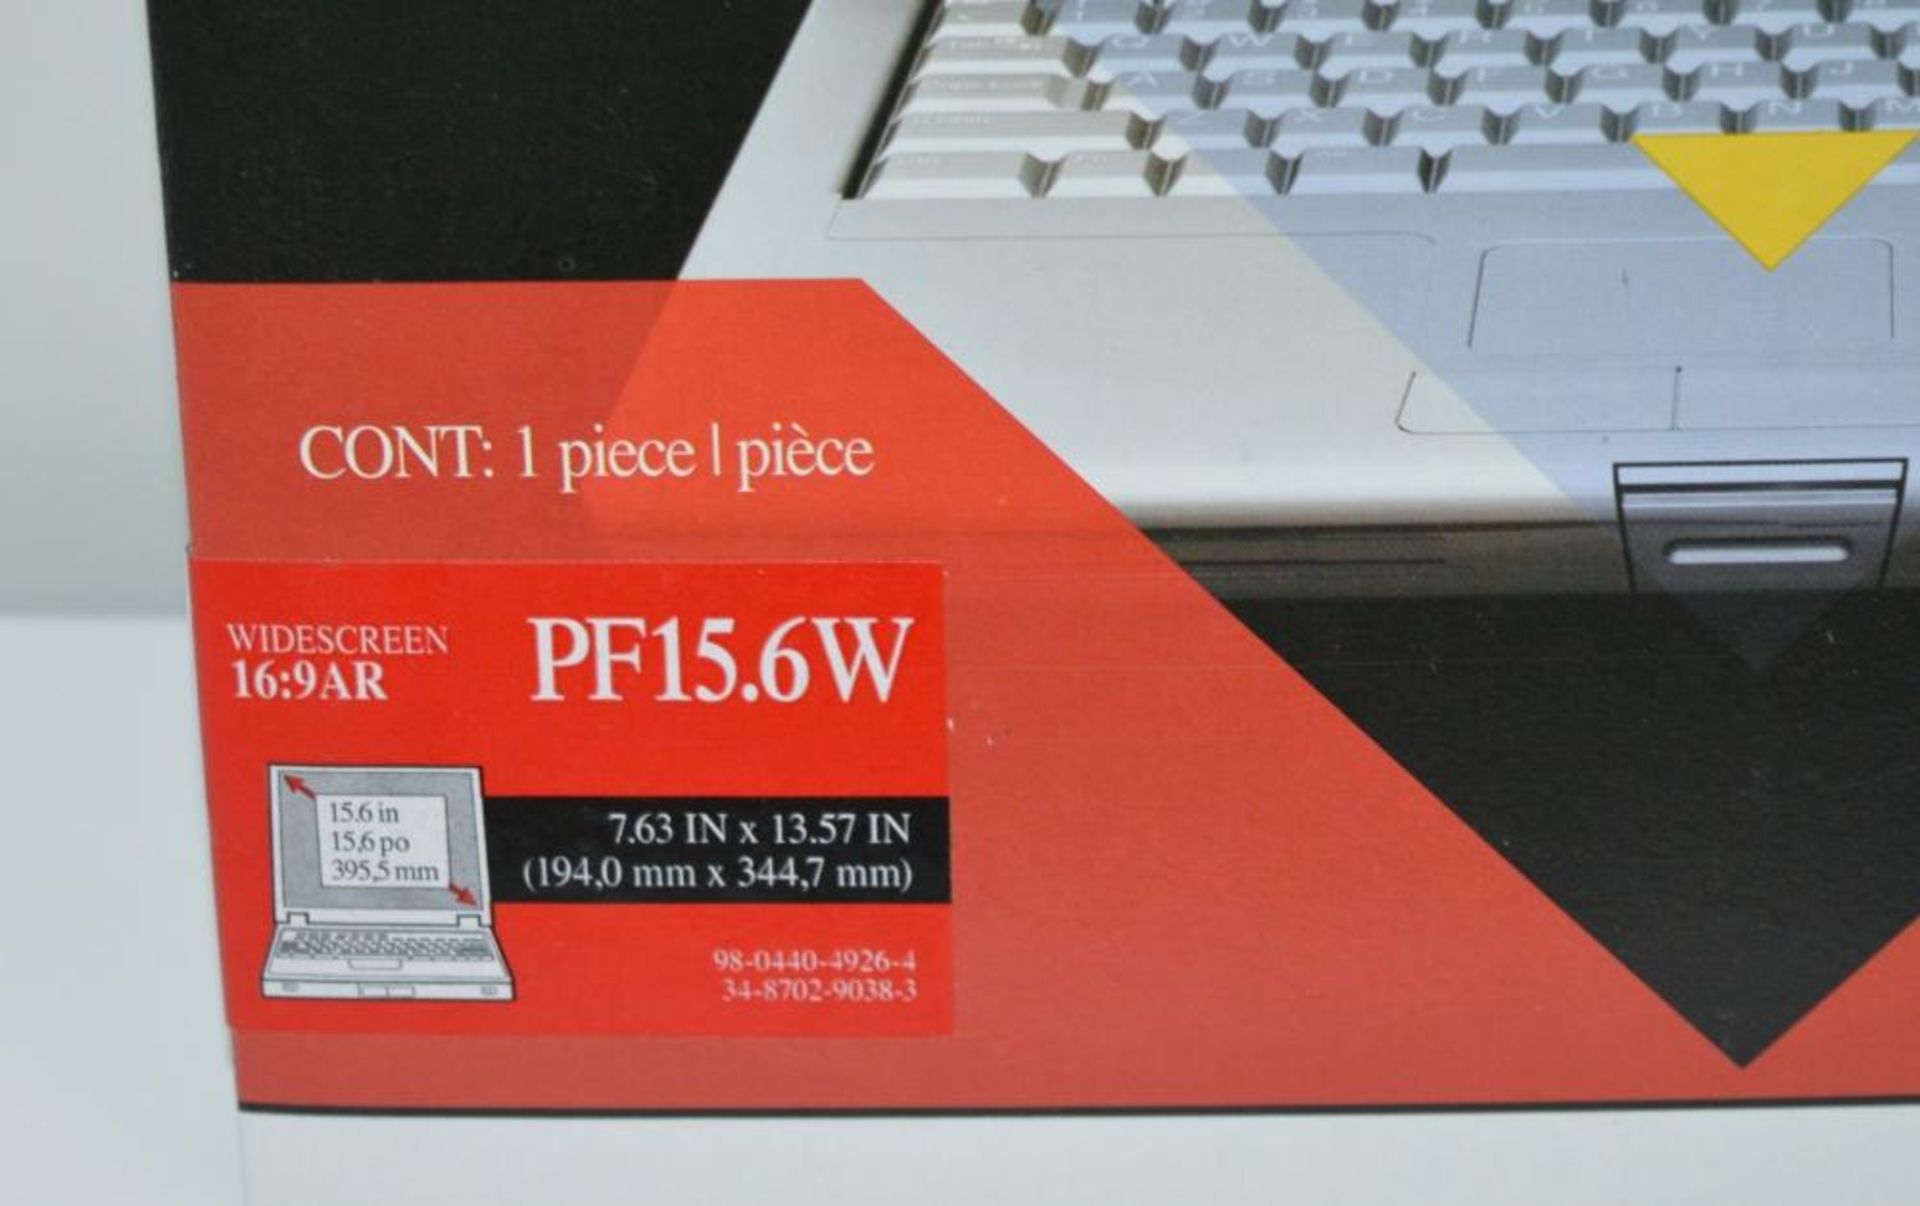 1 x 3M LCD Monitor or Laptop Privacy Filter - Suitable For 15.6 inch Widescreen 16:9 - Product - Image 2 of 3